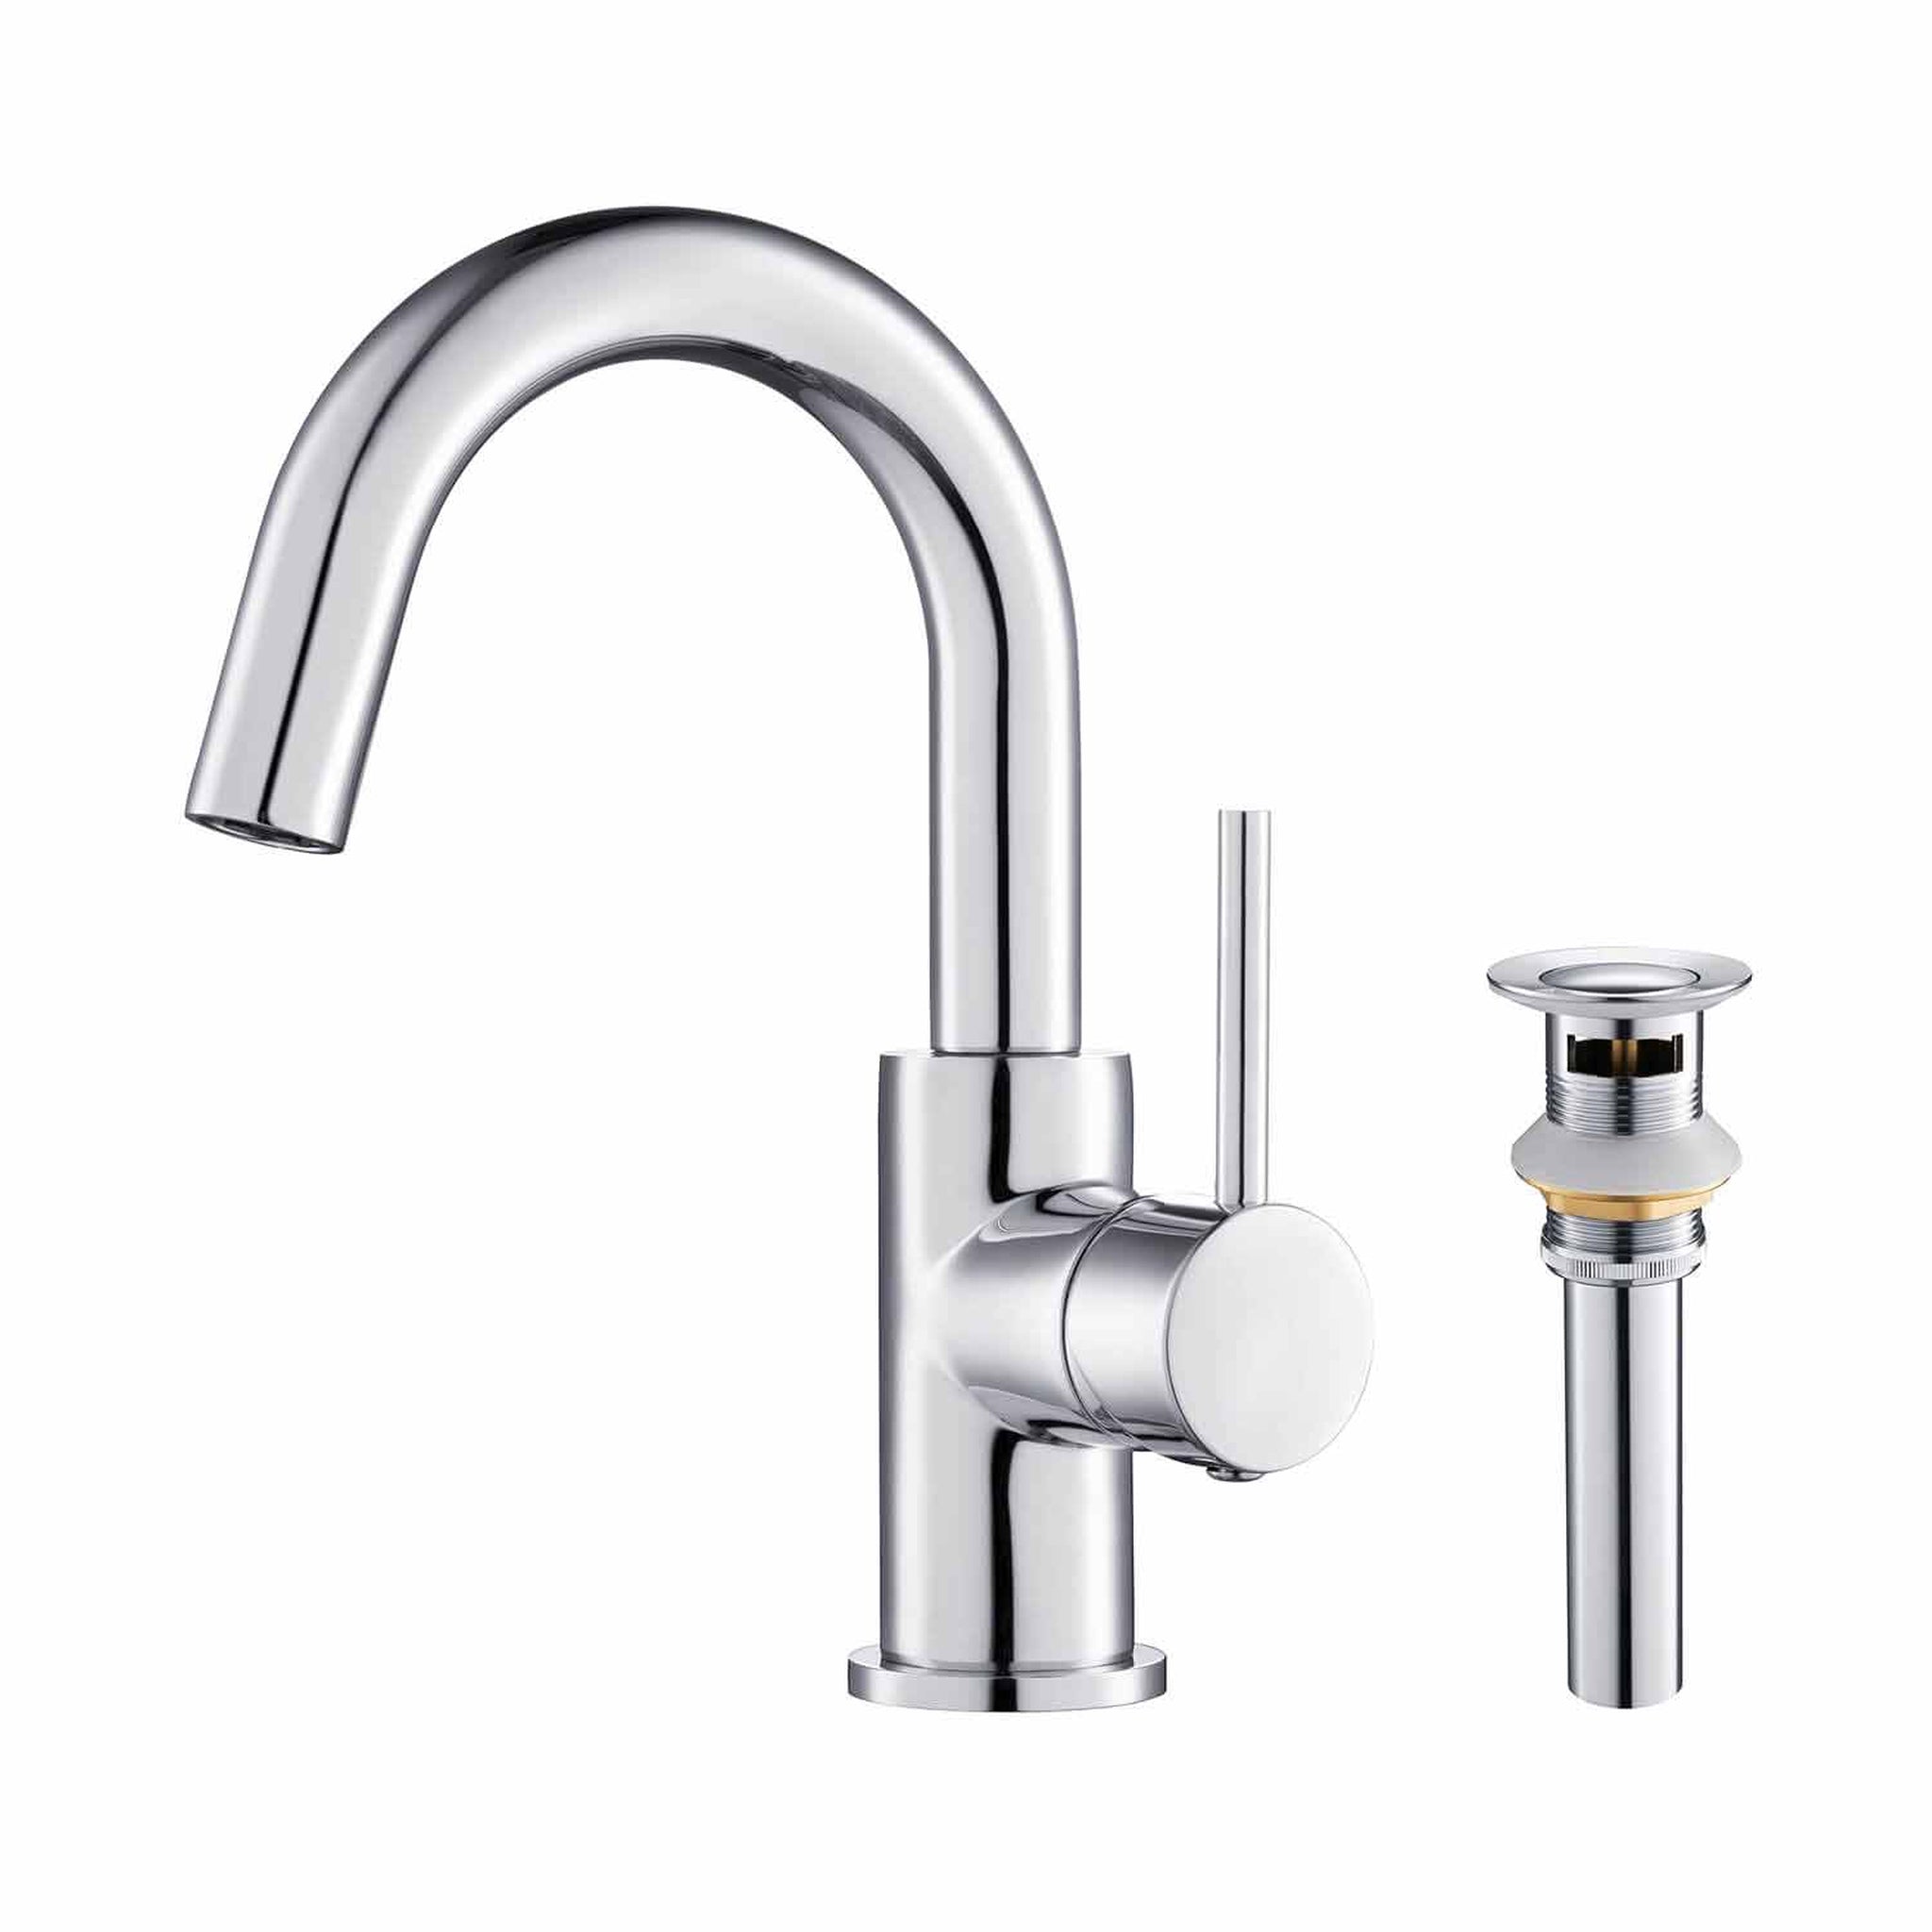 KIBI, KIBI Circular High-Arc Single Handle Chrome Solid Brass Bathroom Sink Faucet With Pop-Up Drain Stopper Small Cover With Overflow